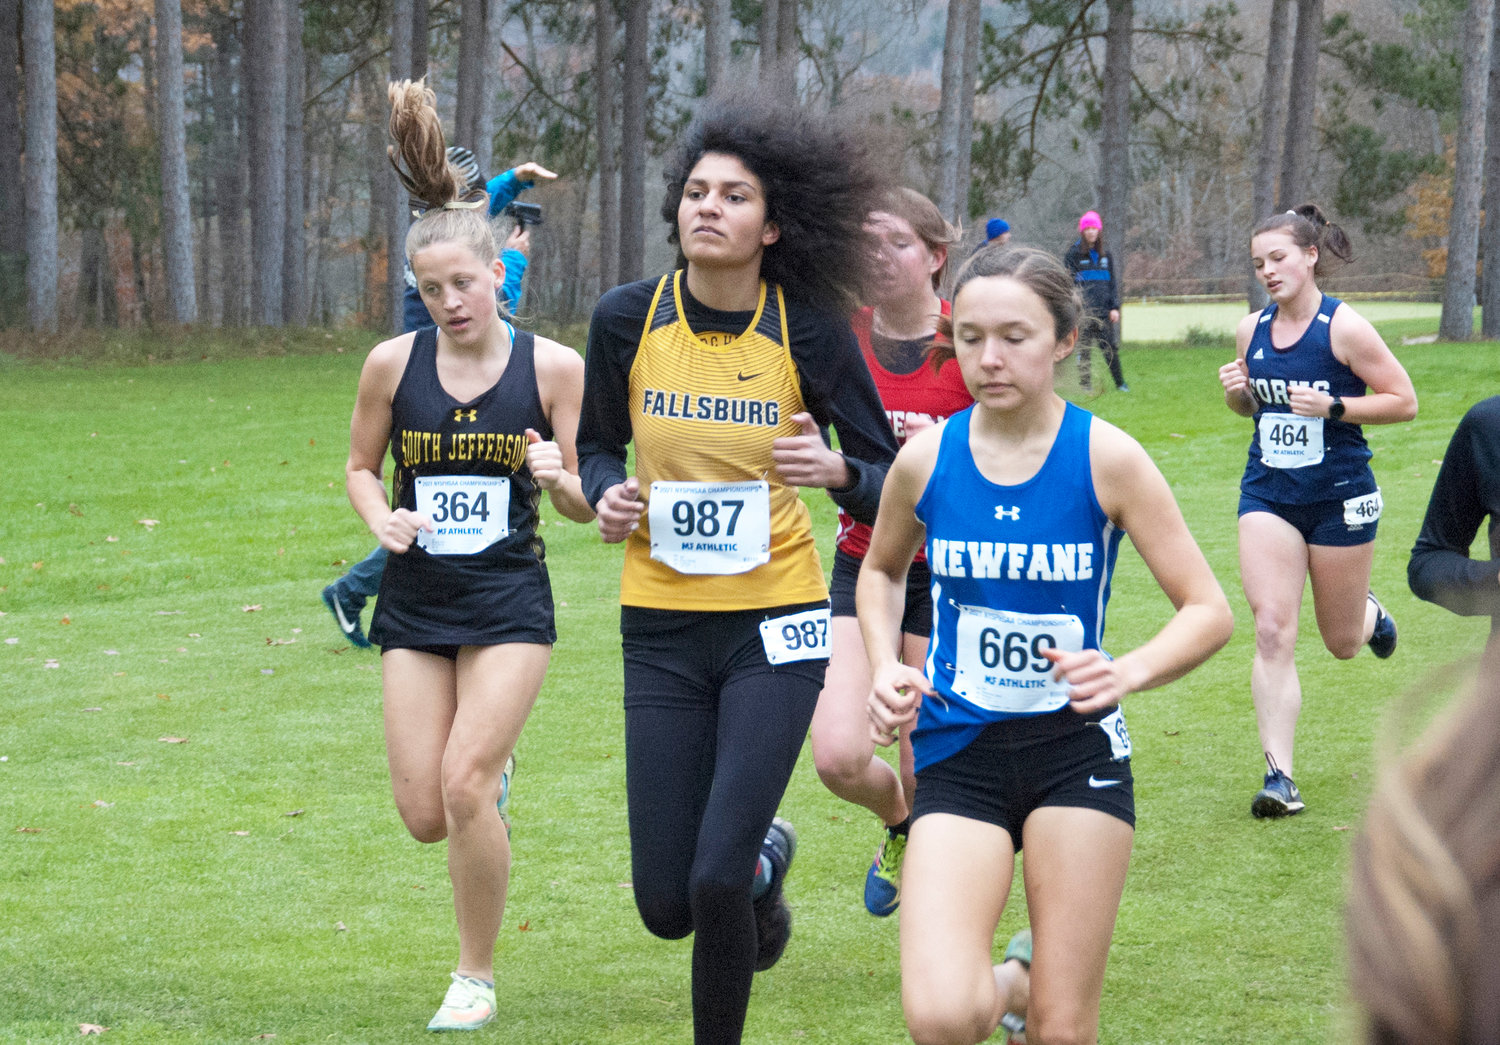 Fallsburg's Gisella King competed at the NYSPHSAA Cross-Country Championships on Saturday.